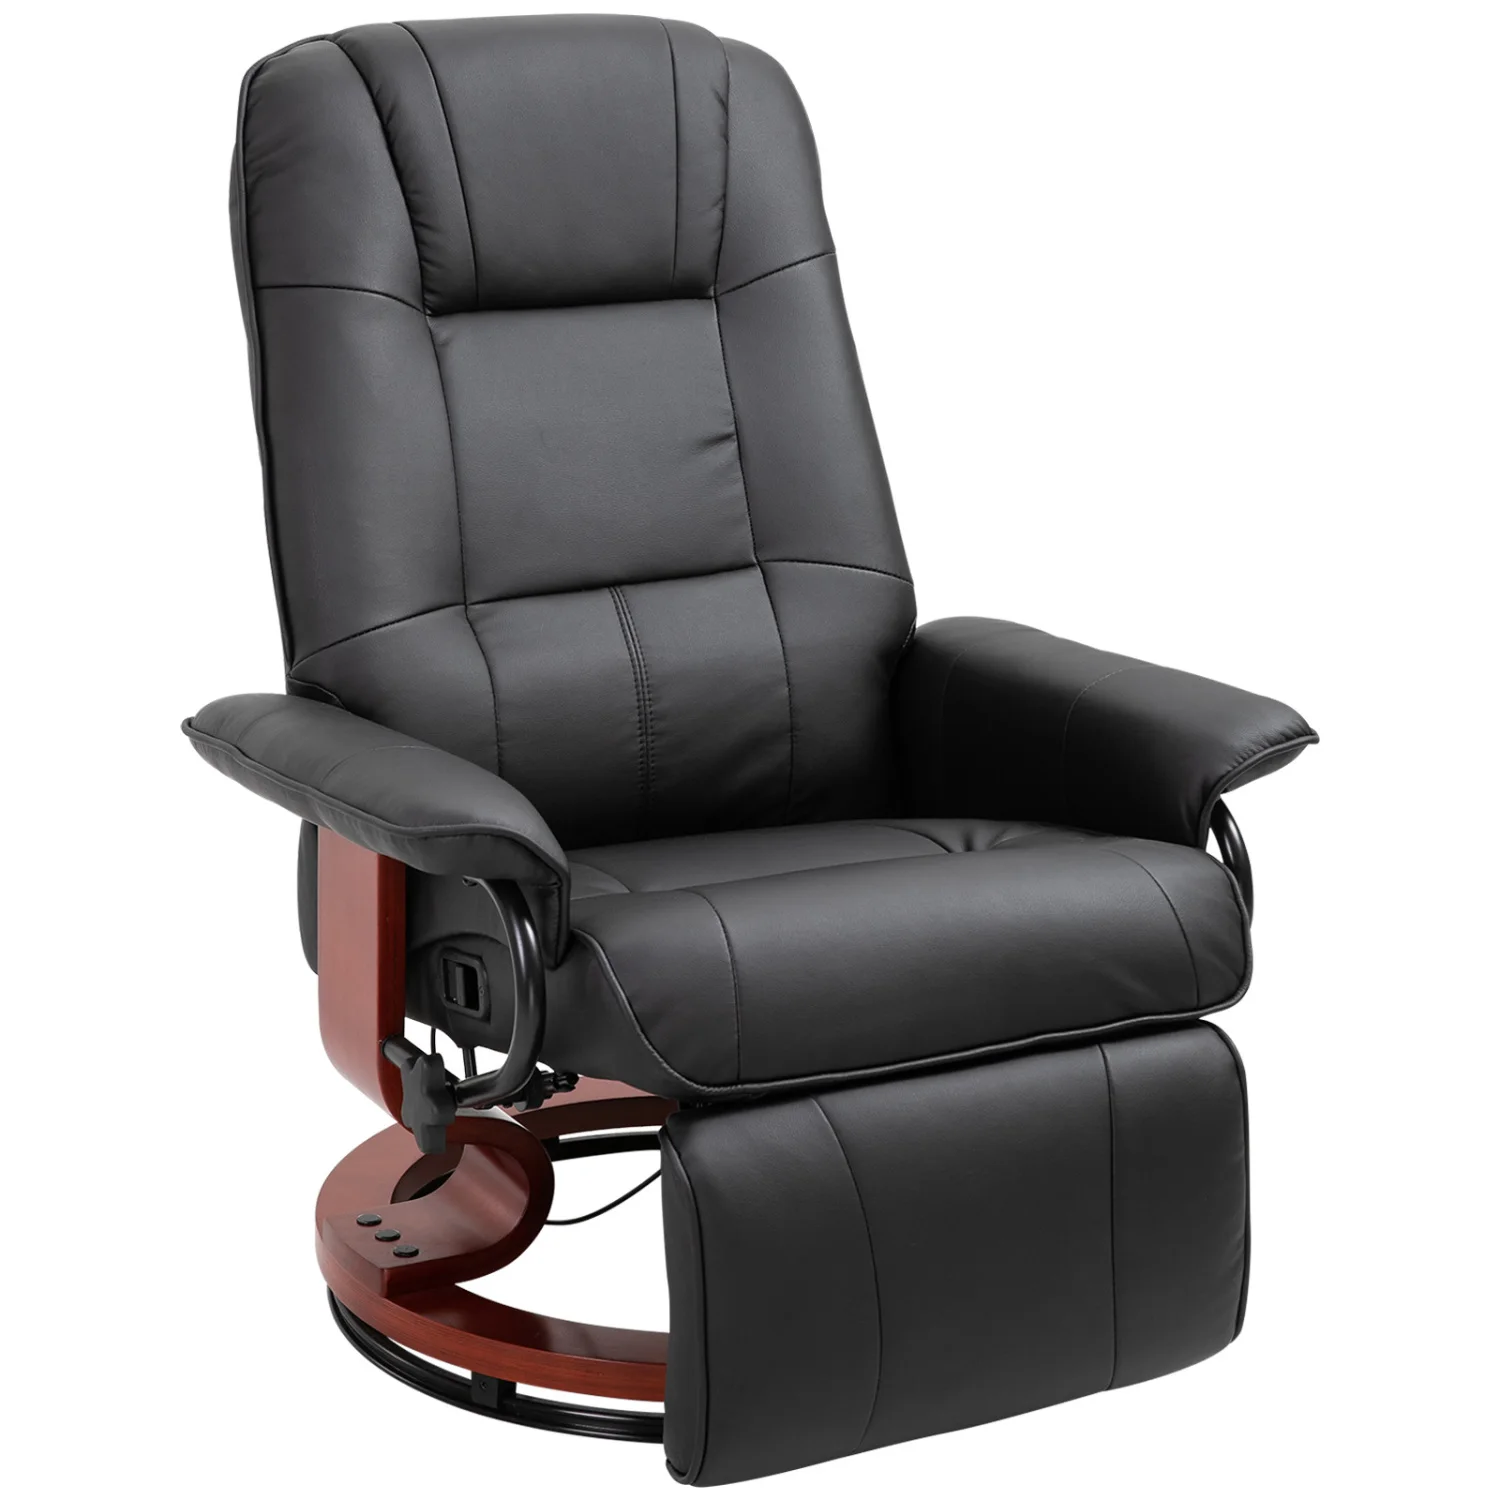 

Black Faux Leather Manual Recliner Chair with Adjustable Swivel, Comfortable Footrest and Armrest, Stylish Wrapped Wood Base for